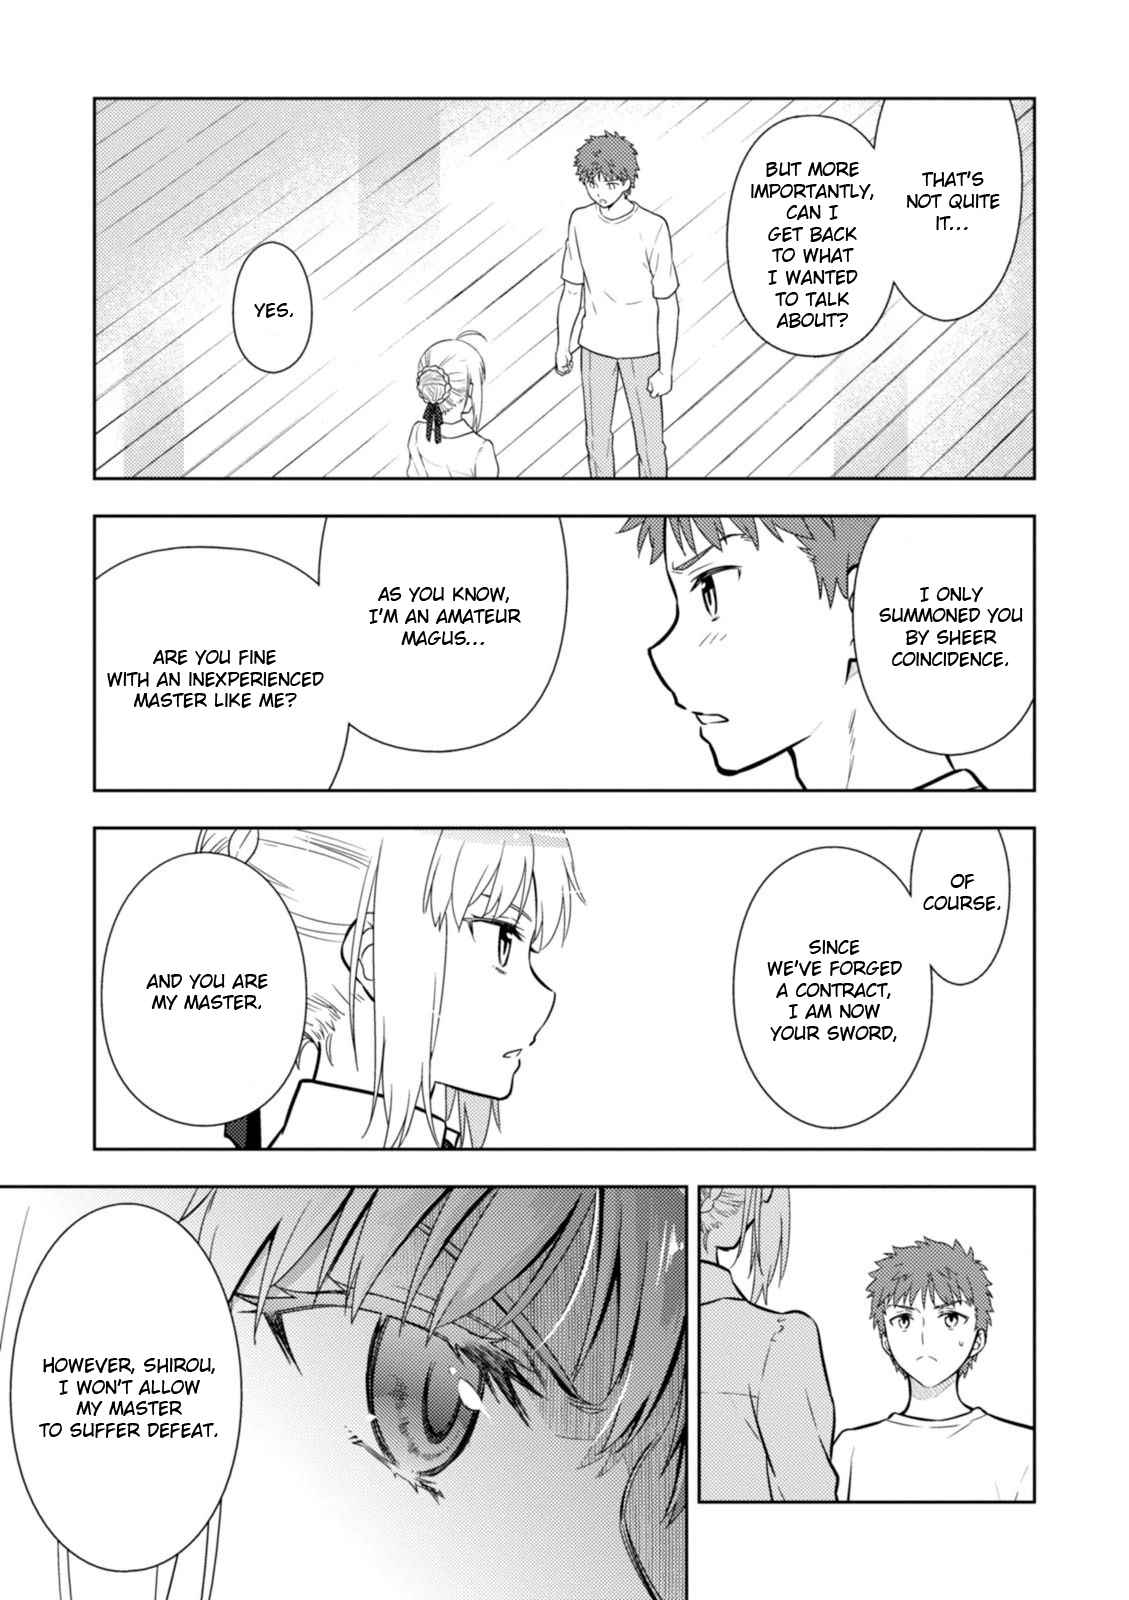 Fate/stay night: Heaven's Feel Ch. 13 Day 4 / The Holy Grail War and Its Origins (2)